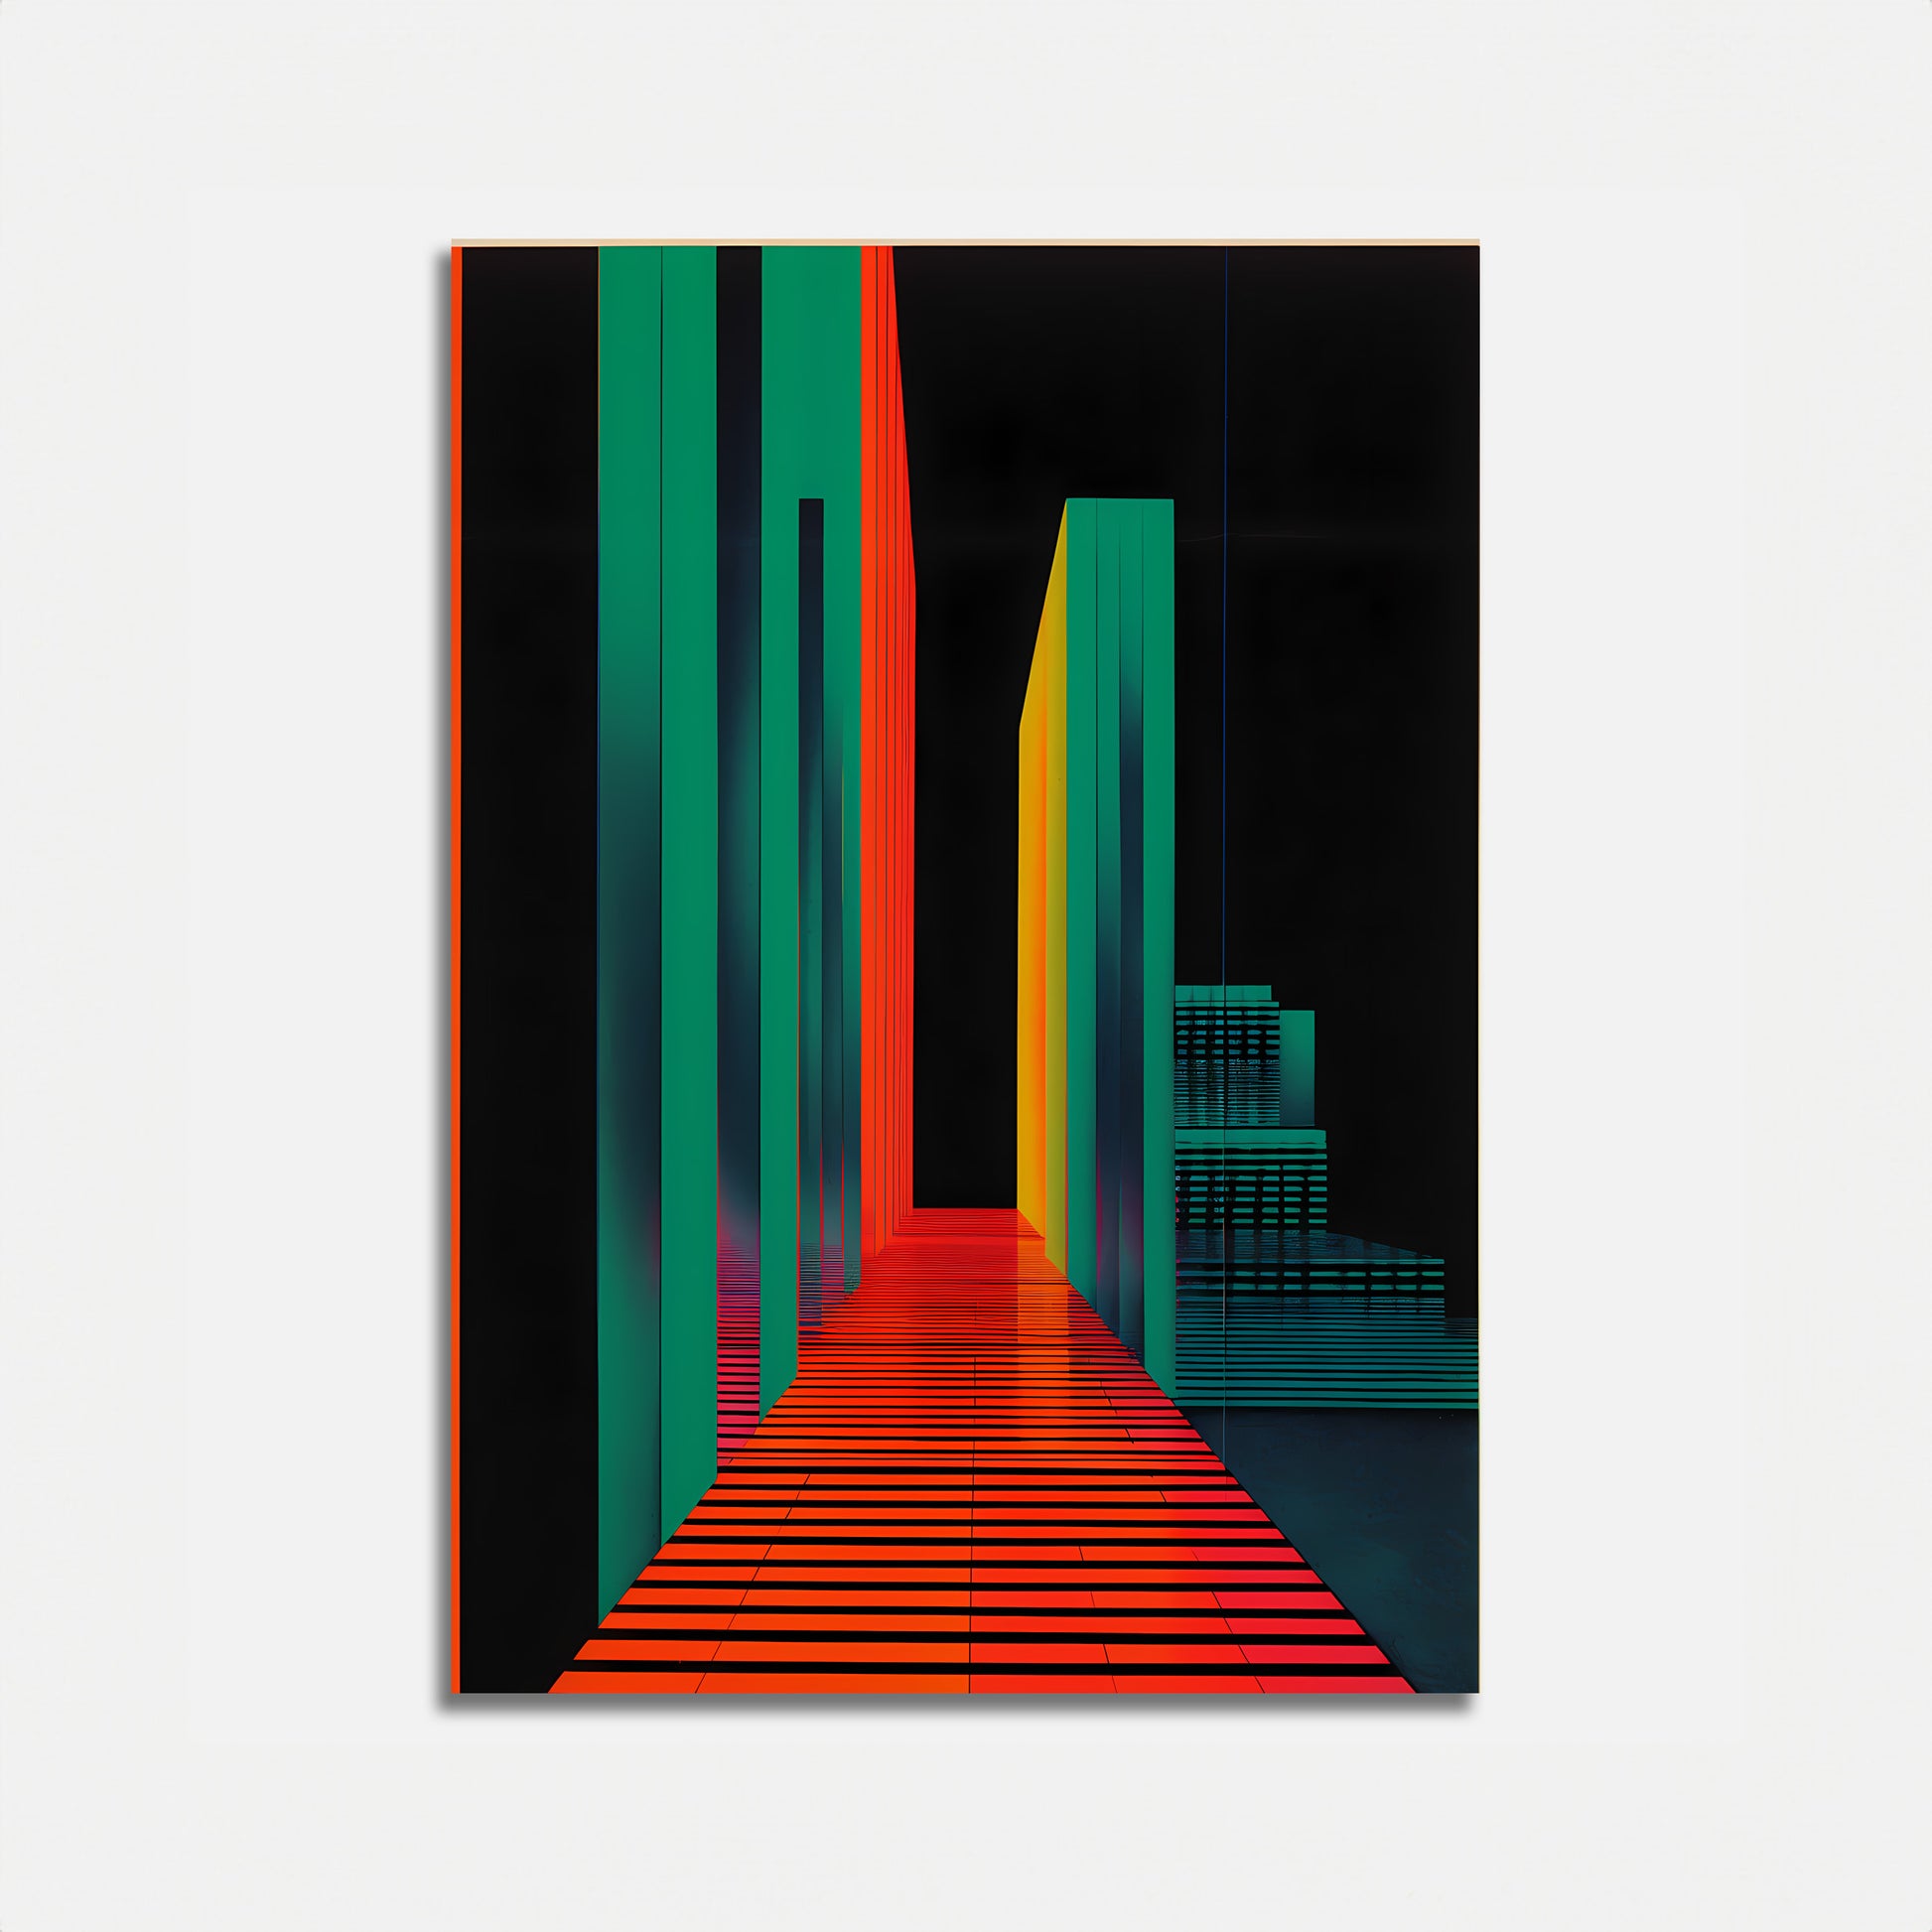 Abstract colorful geometric artwork with vertical lines and a central vanishing point.